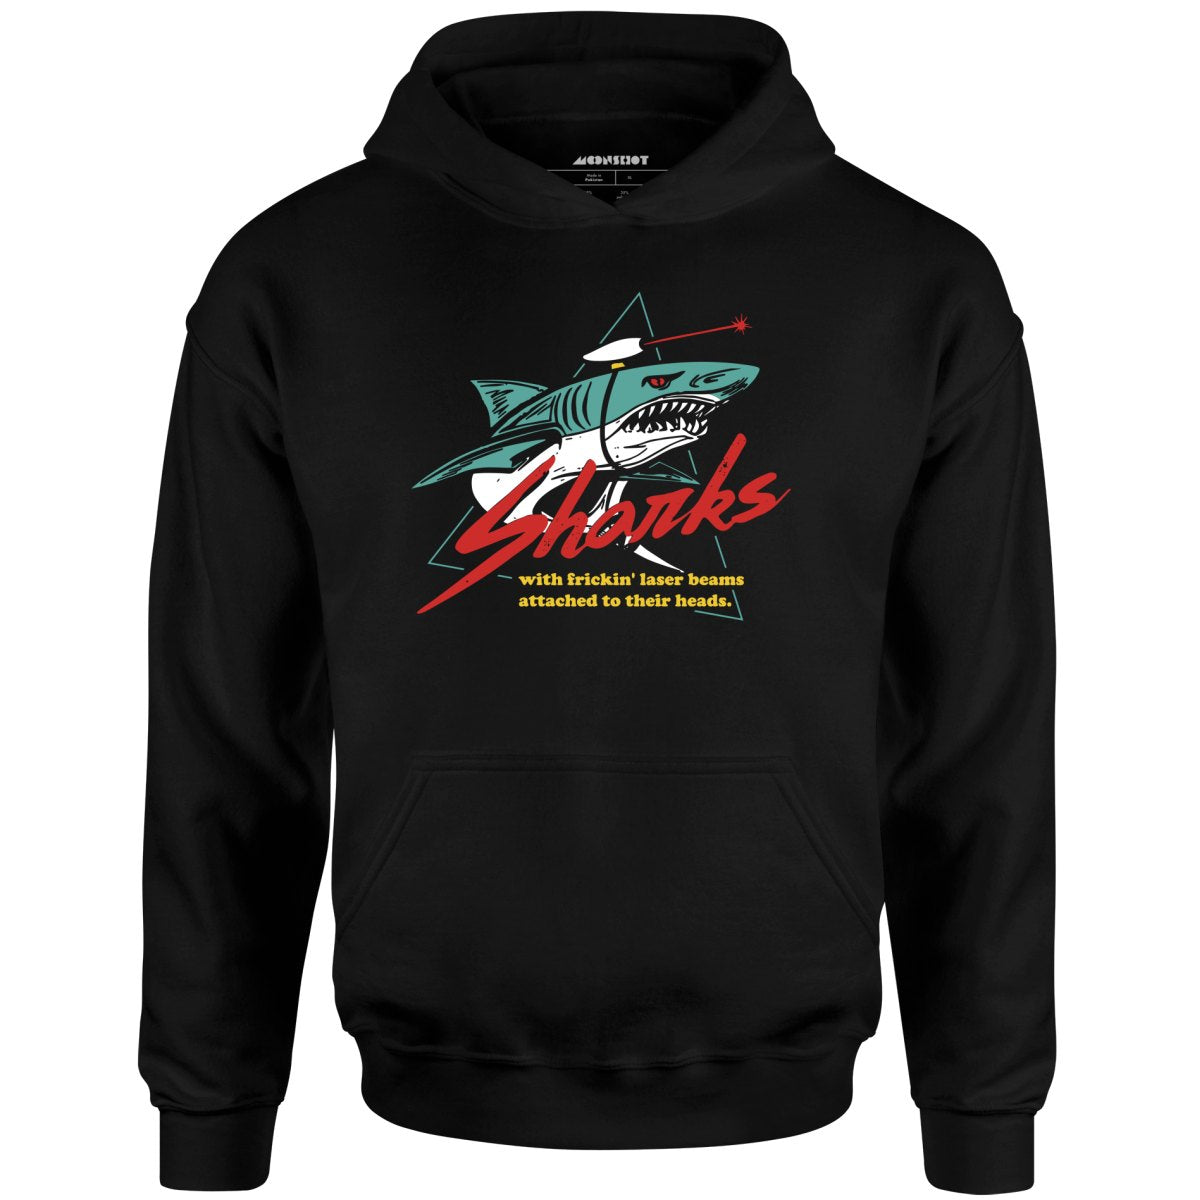 Sharks With Frickin' Laser Beams Attached to Their Heads - Unisex Hoodie